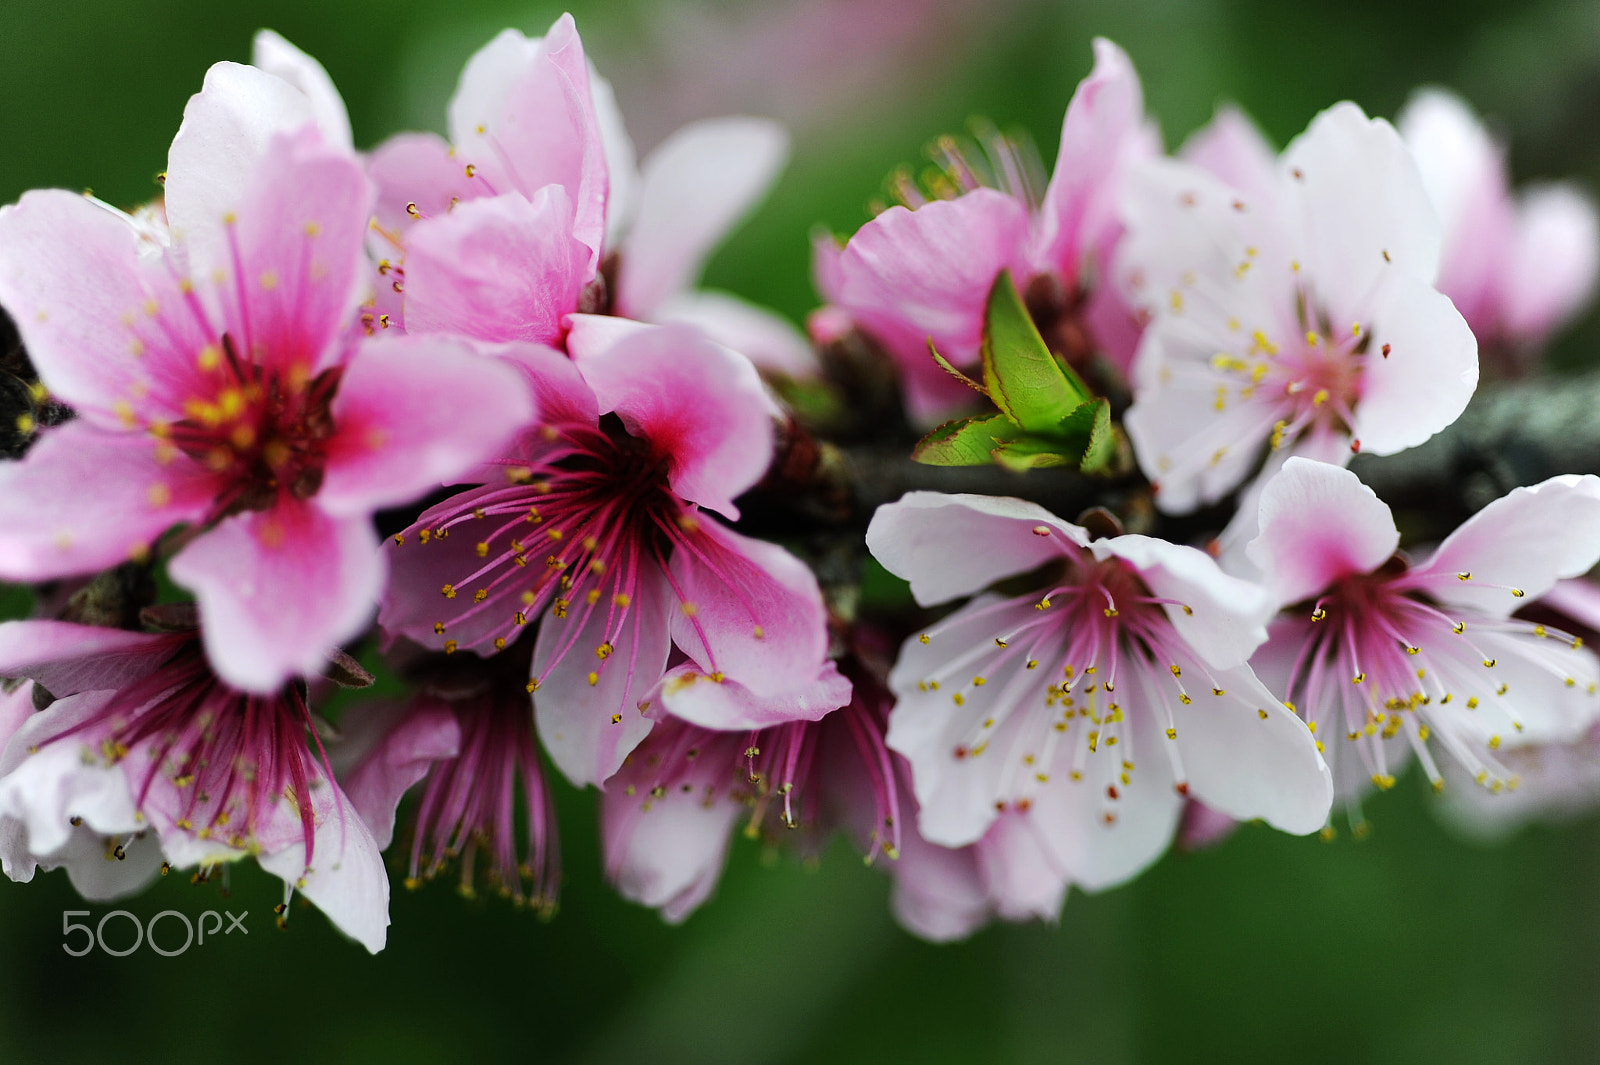 Nikon D3 sample photo. Peach blossoms were blossoming photography